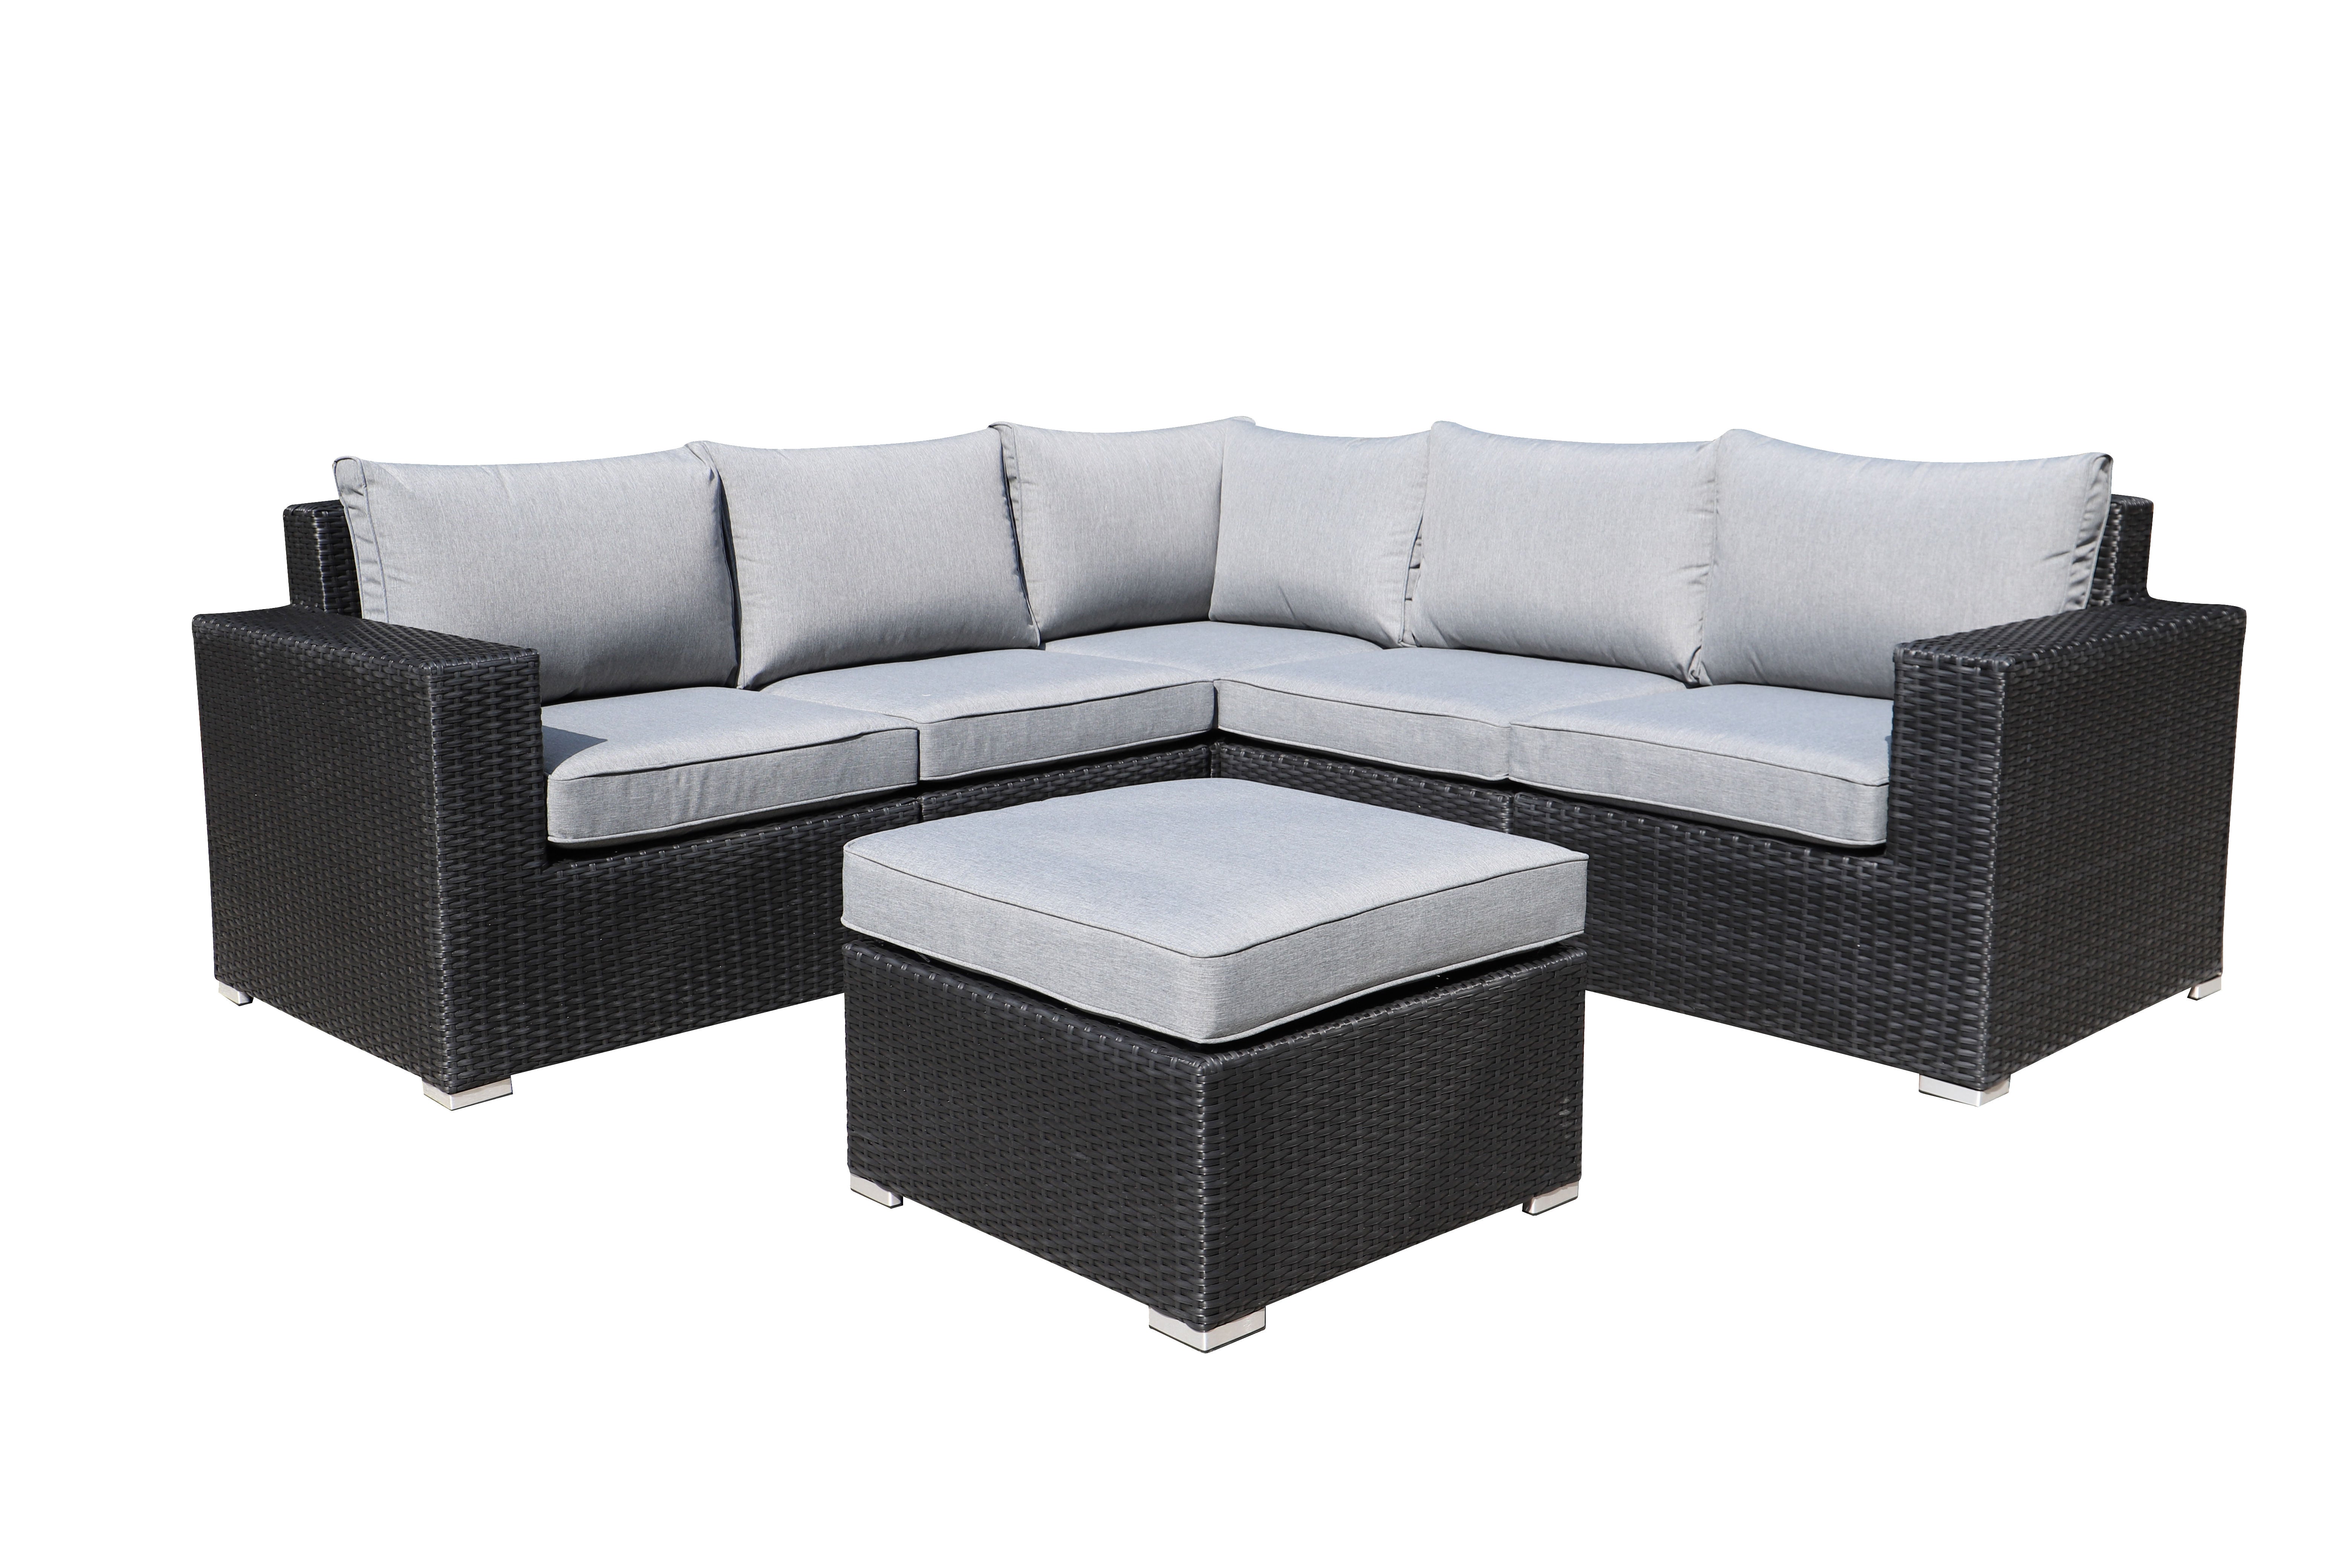 MOSS MOSS-0908NC - Carolina Collection, 6 pcs modular black flat wicker and aluminum structure including ottoman, with grey cushion and glass for coffee table (3 boxes)